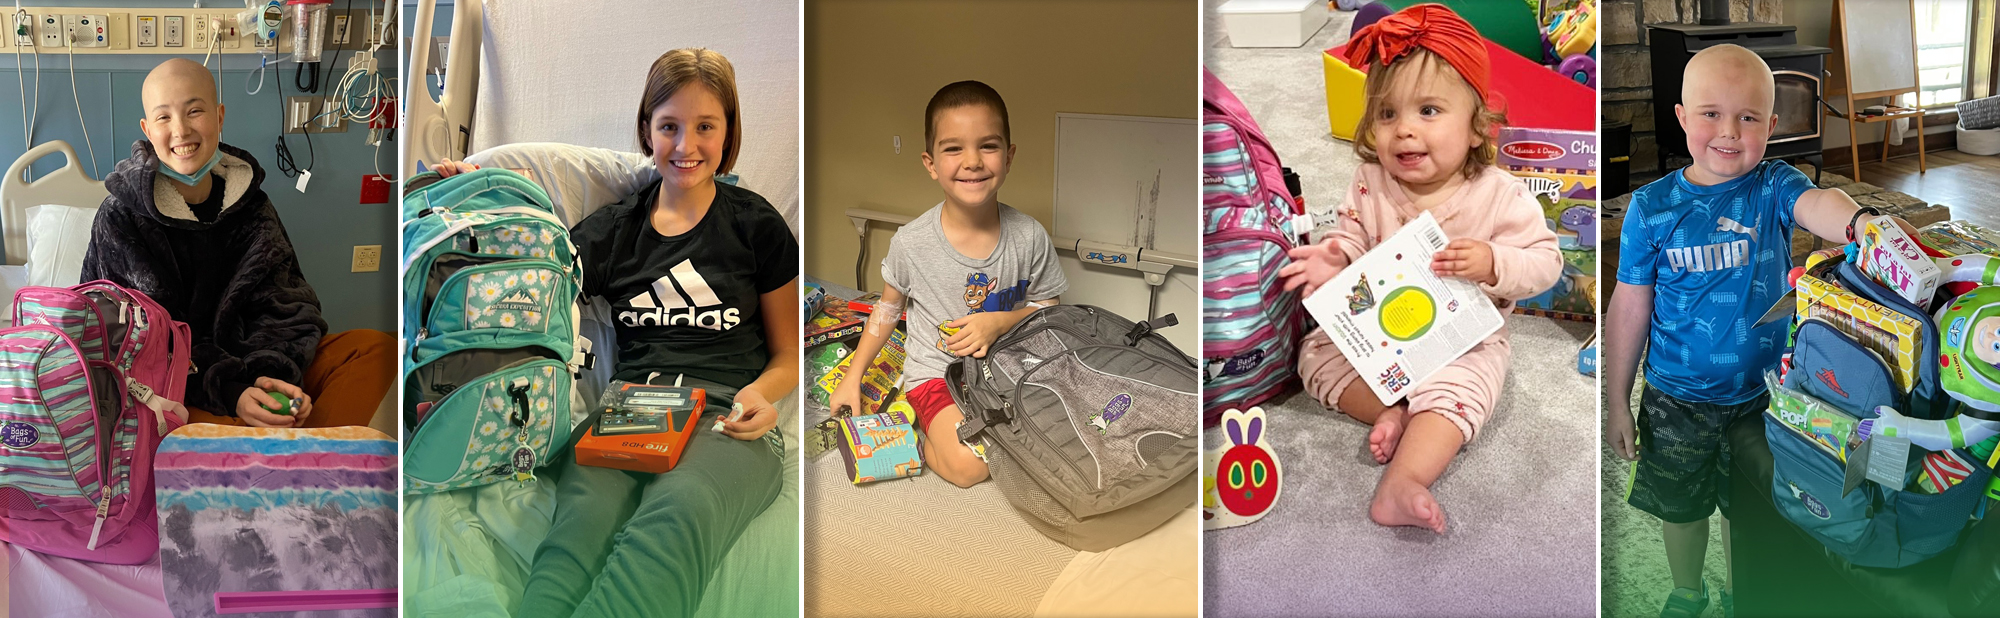 5 different images of kids with their Bags of Fun smiling.